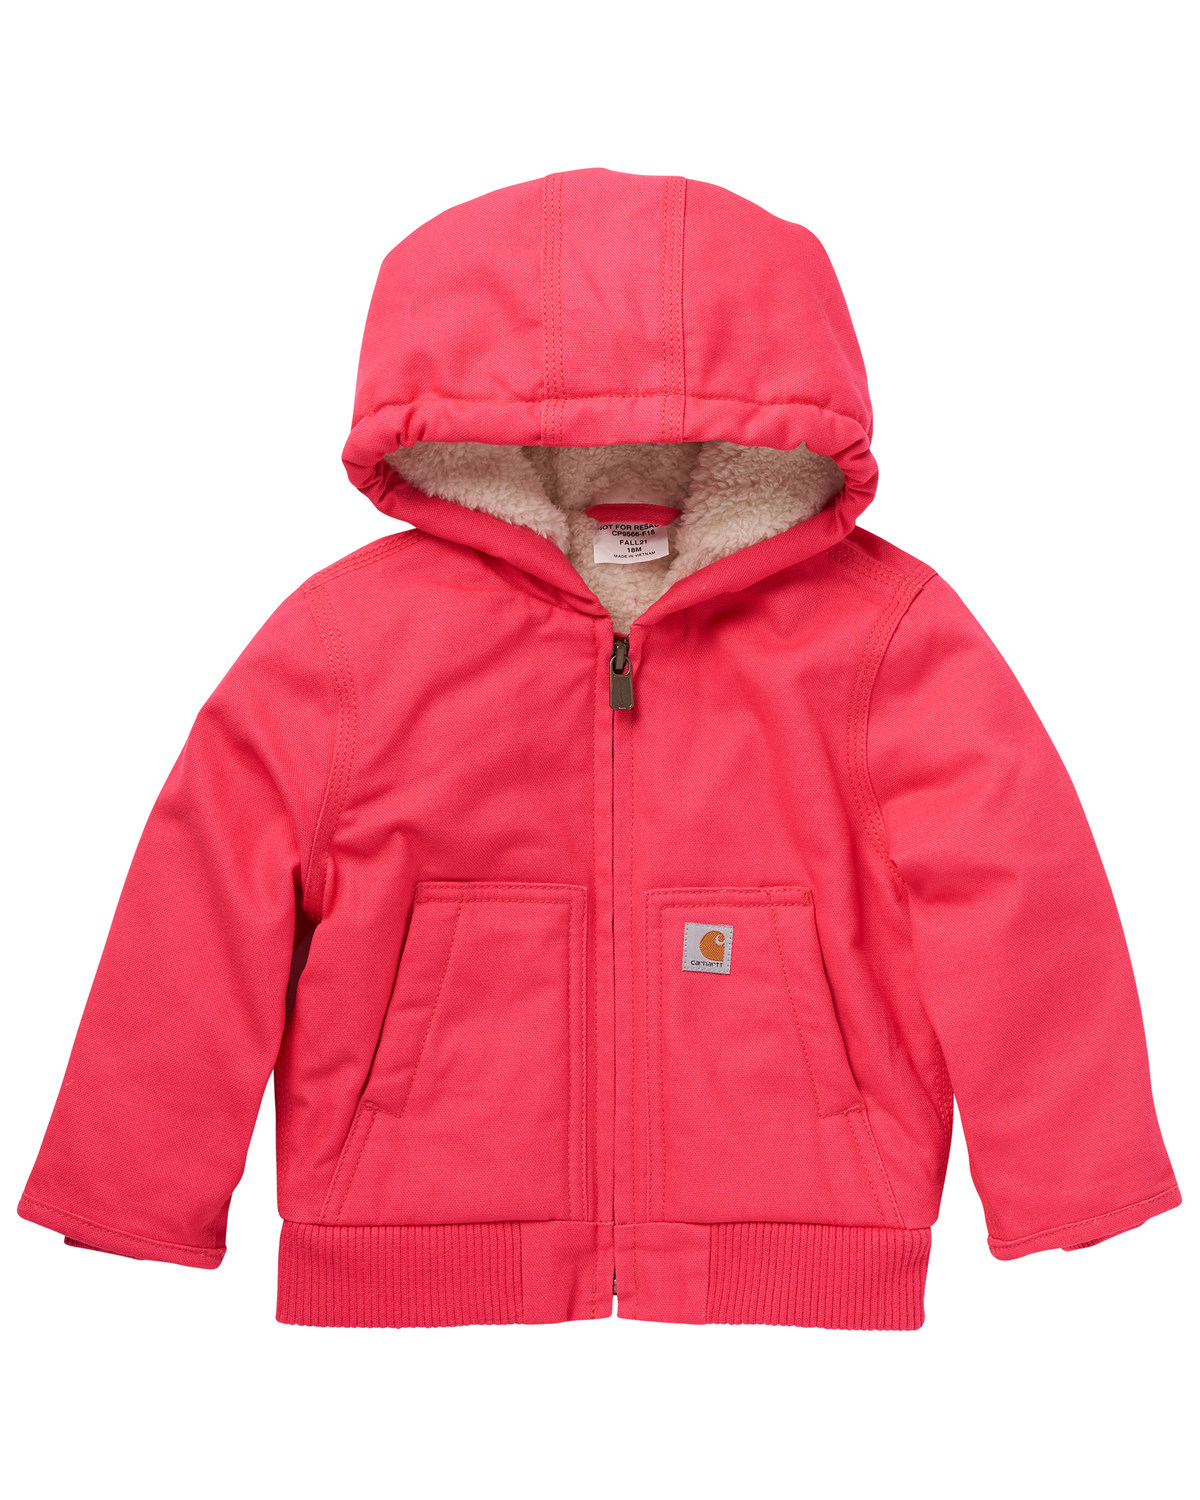 Carhartt Infant Girls' Insulated Active Jacket